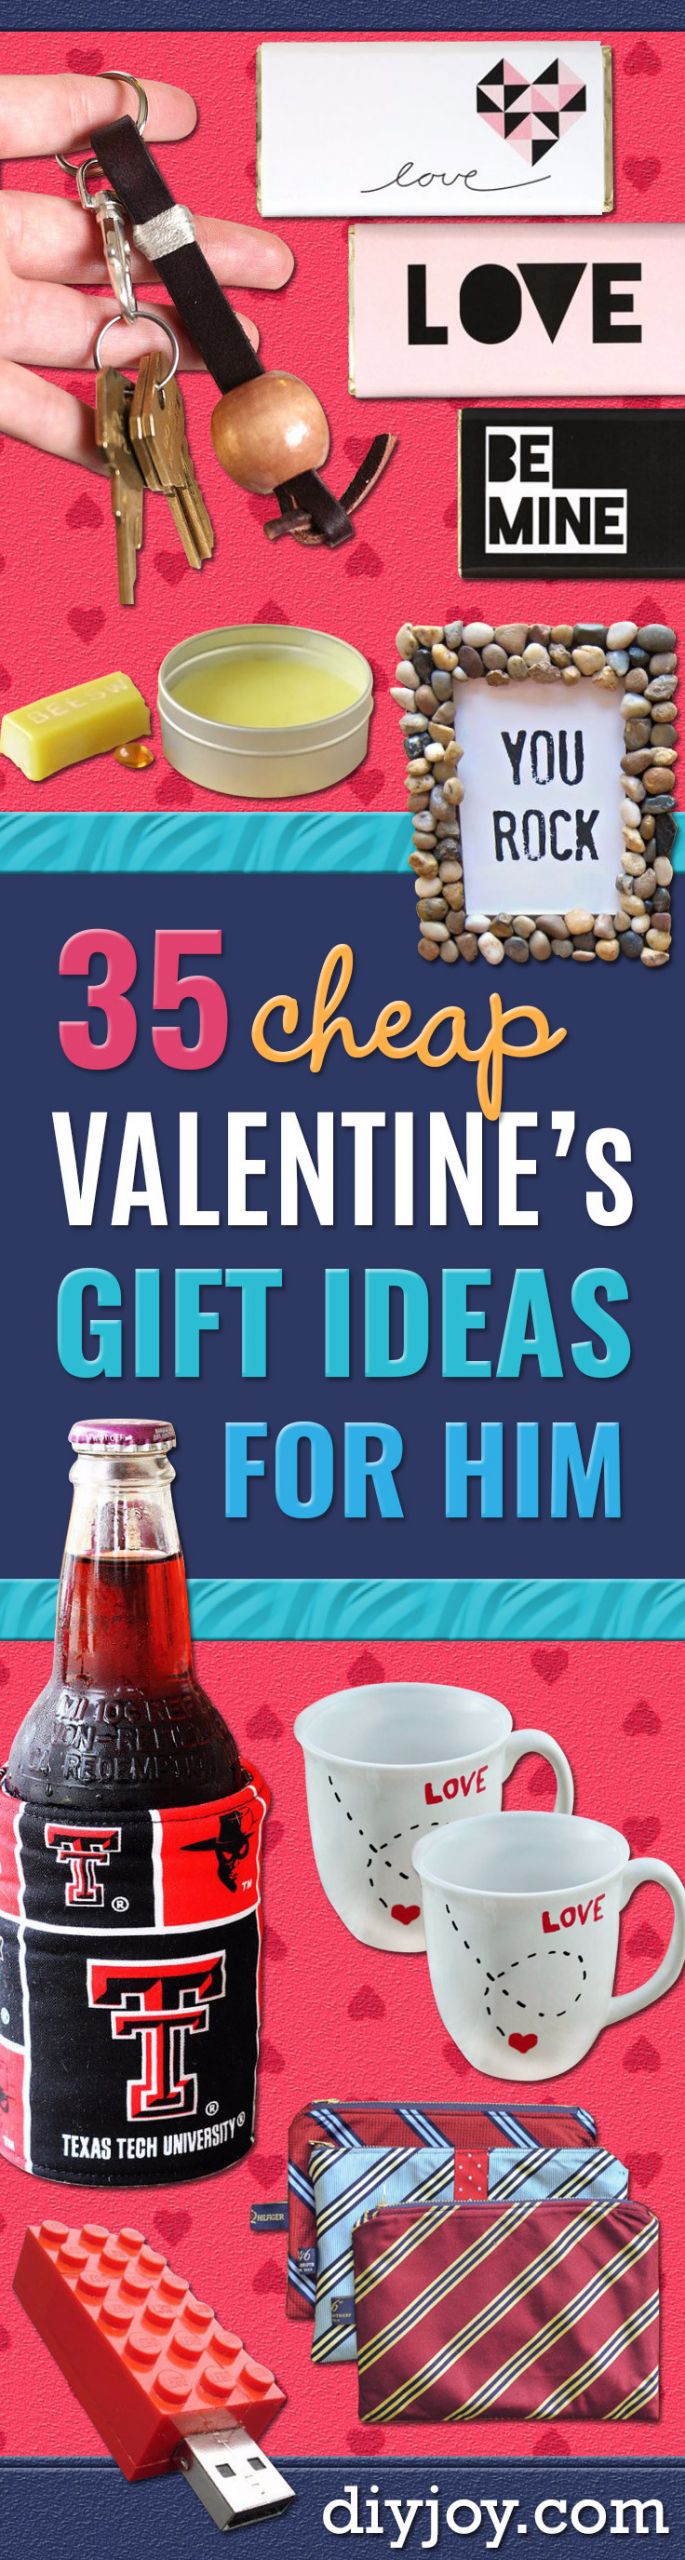 Valentine Gift Ideas For Him
 35 Cheap Valentine s Gift Ideas for Him